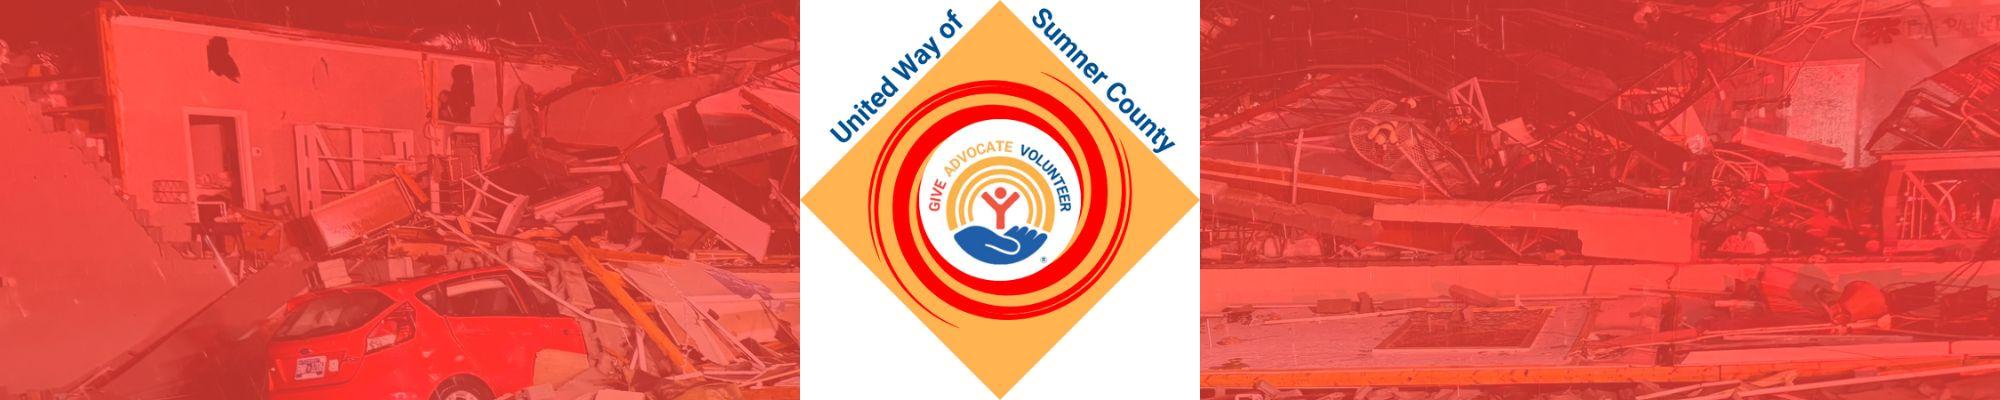 UWSC Disaster Relief hub logo tornado damage photo with red overlay